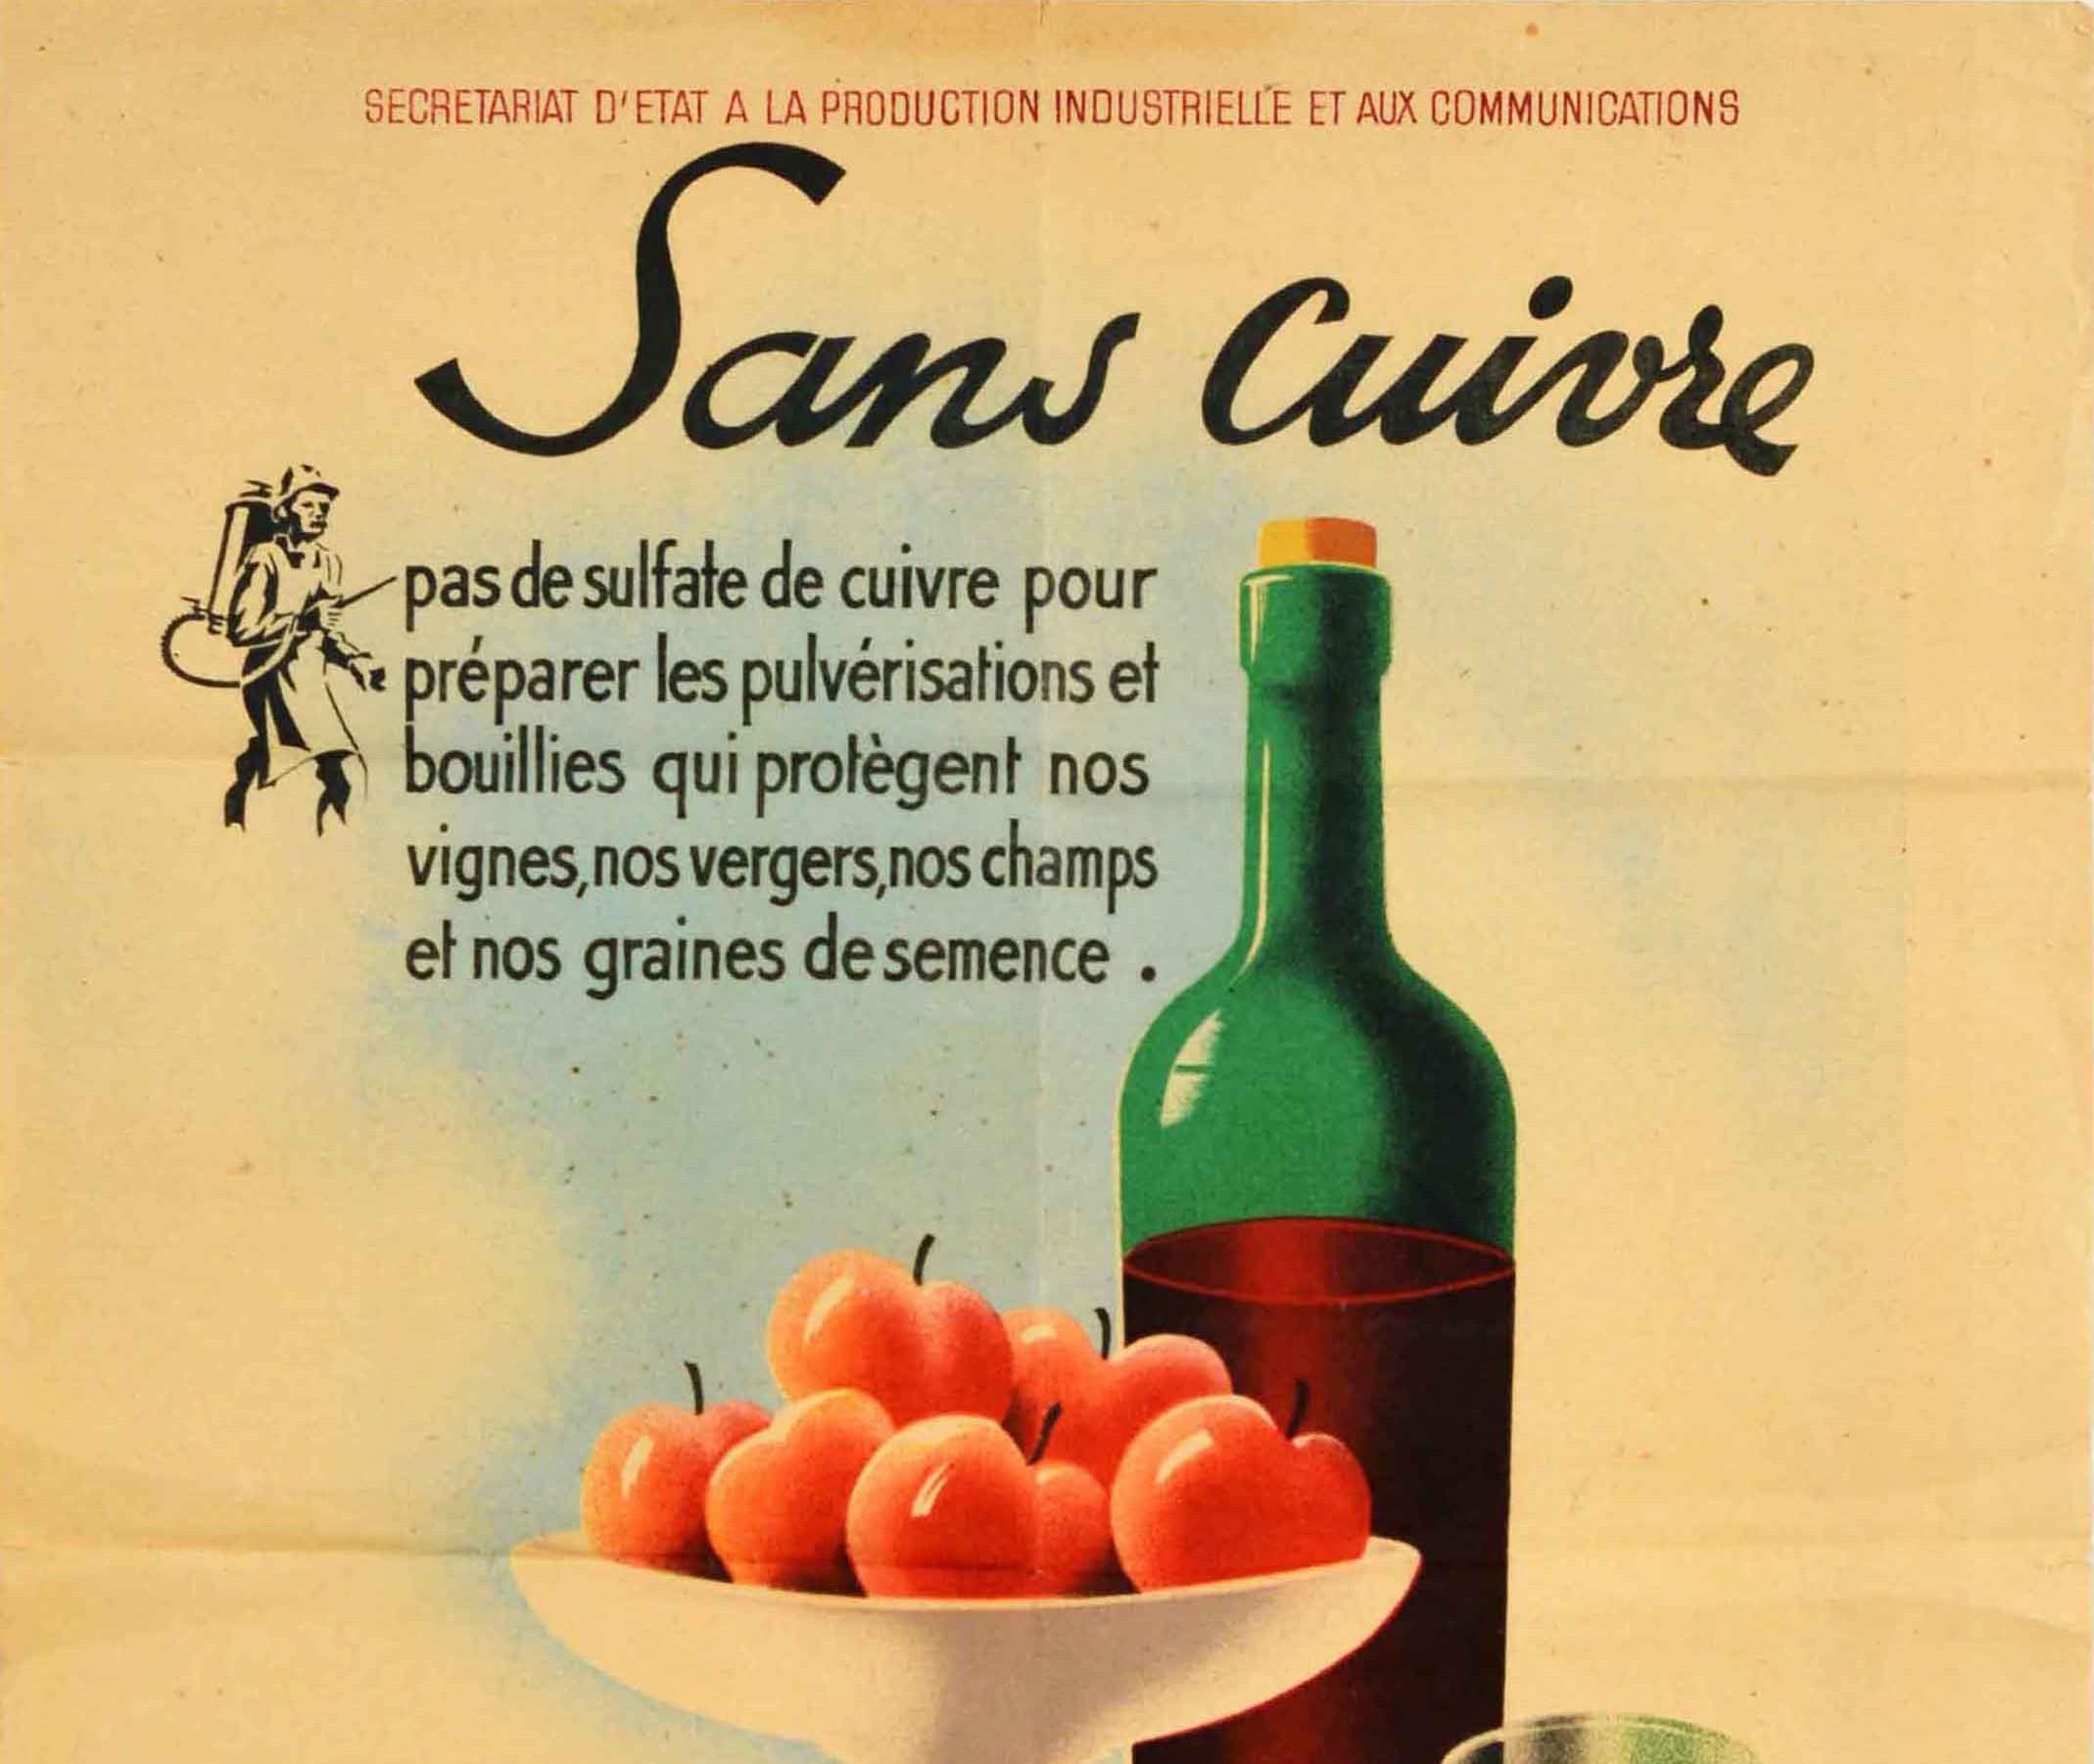 Original vintage agriculture propaganda poster issued by the State Secretariat for Industrial Production and Communications Commissariat for the Mobilisation of Non-Ferrous Metals featuring an illustration of a drink glass and bottle of red wine on